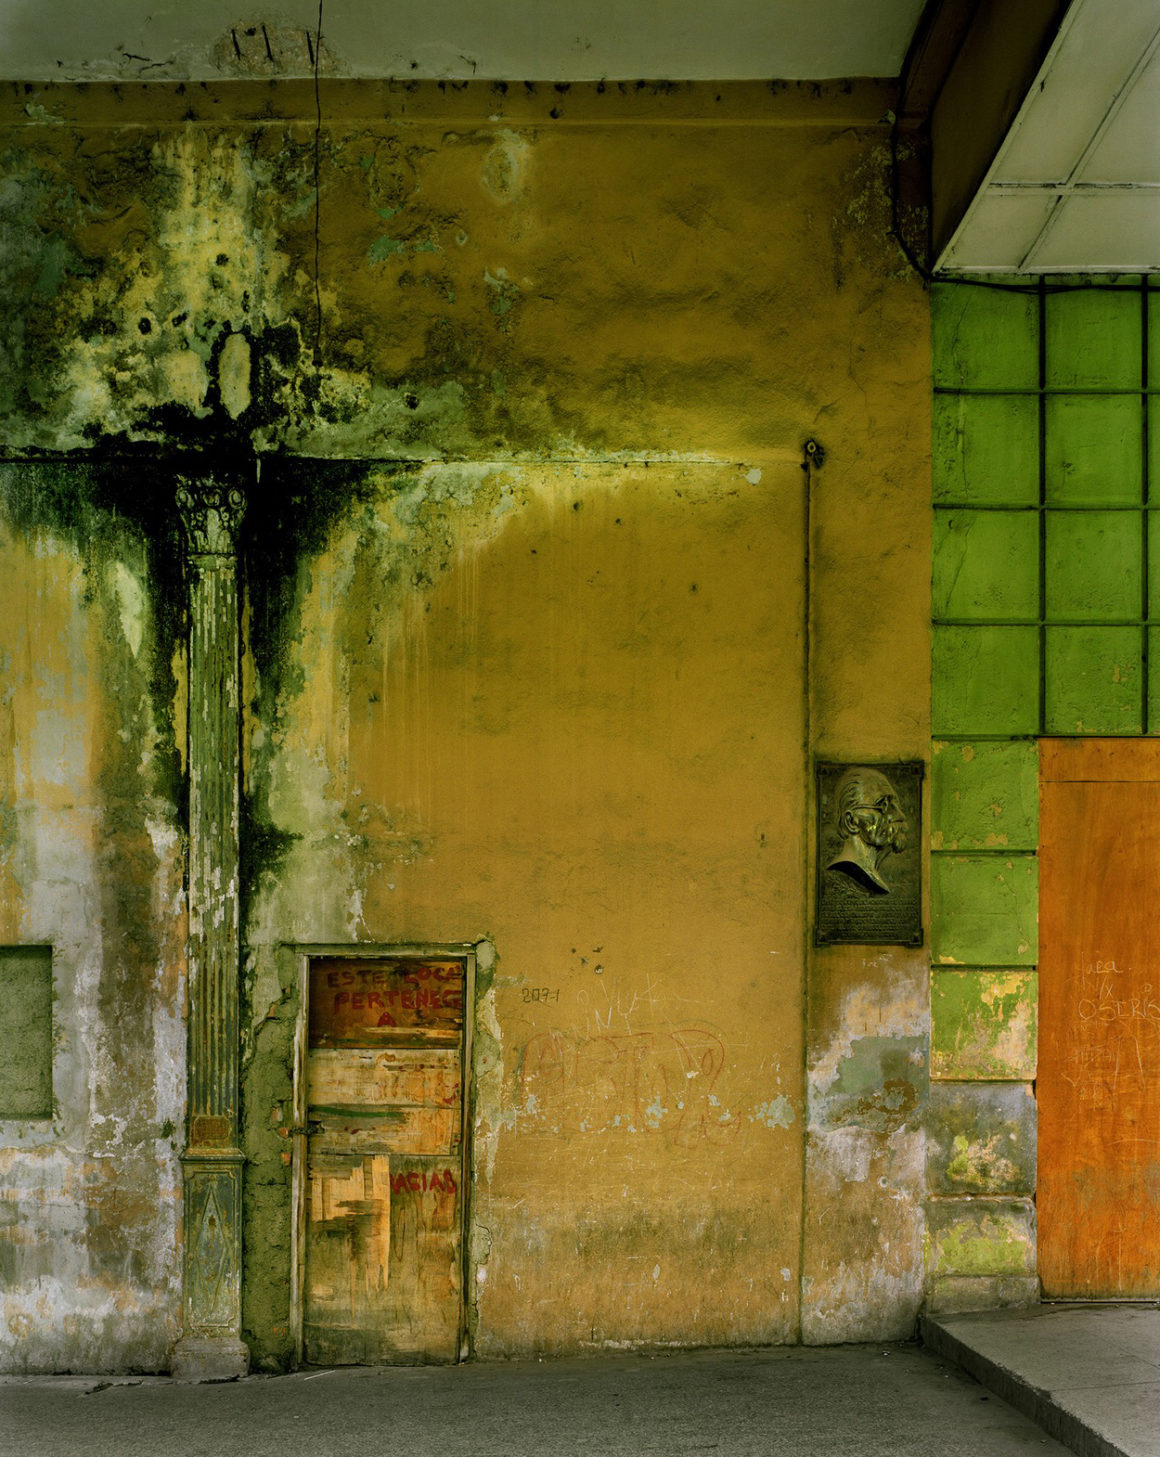 Abstract Wall No 2, Havana 2000 by Michael Eastman